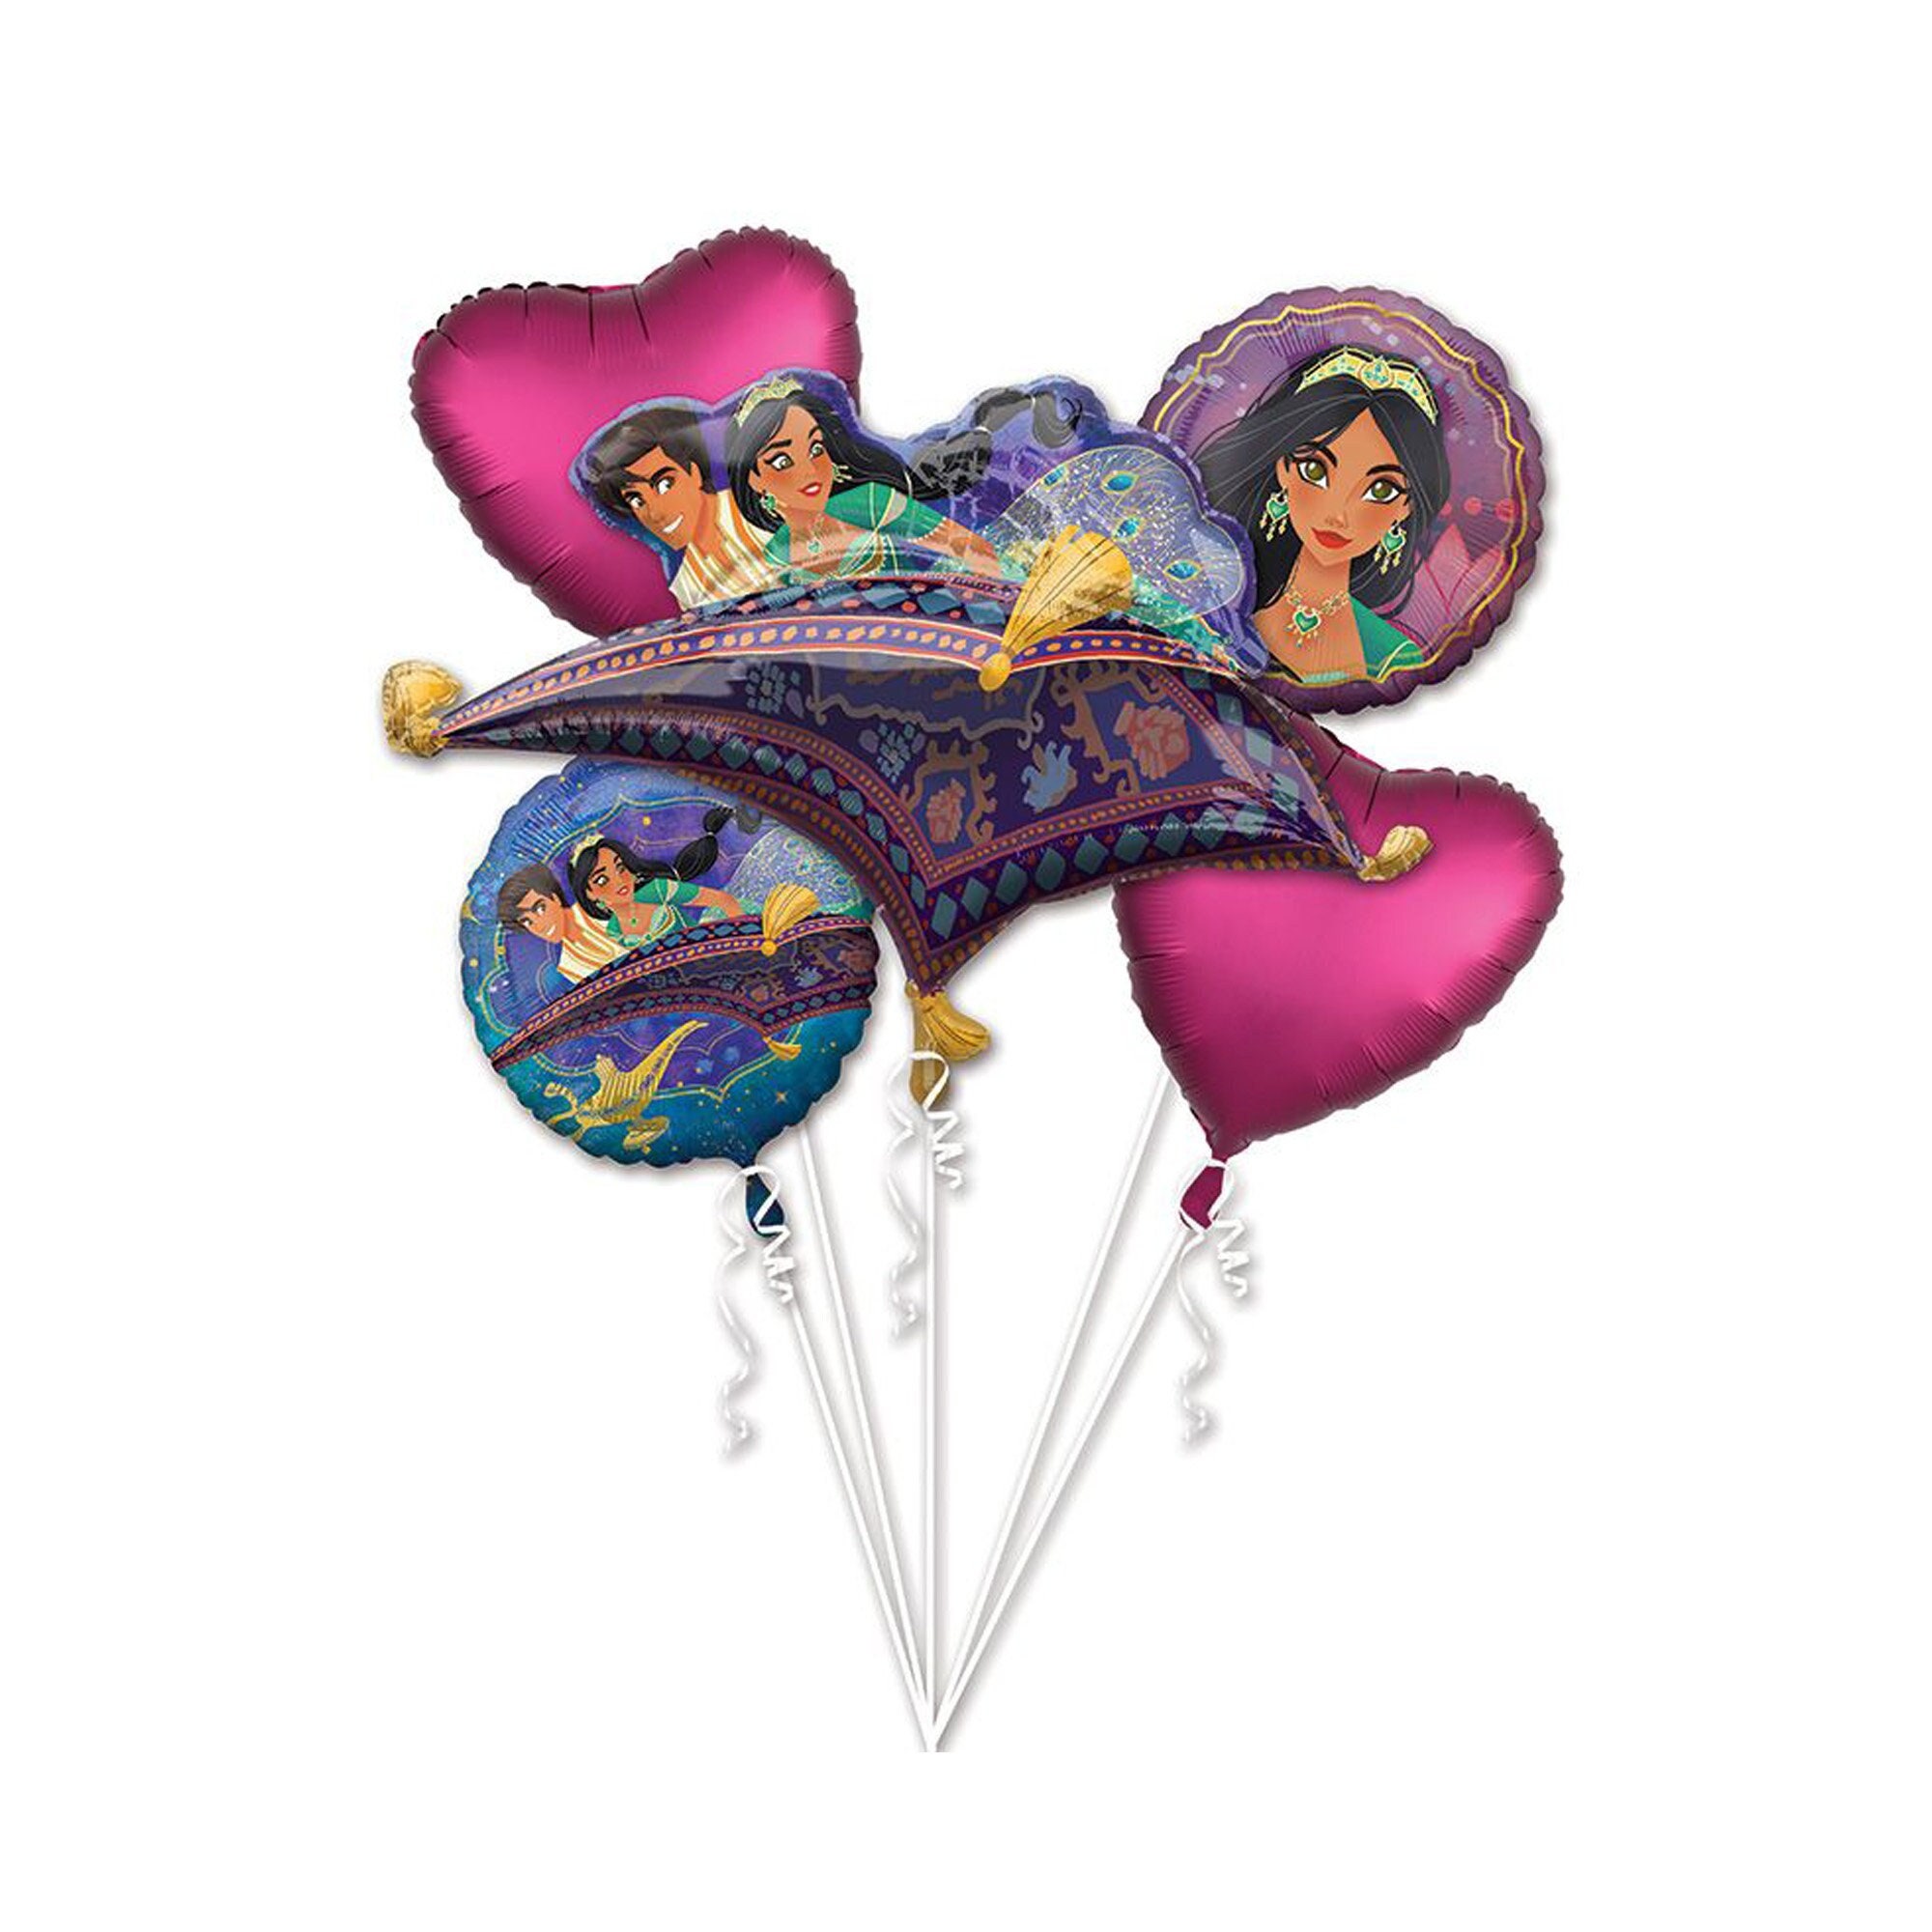 Aladdin - Great Gift Ideas that won't break budget! Review